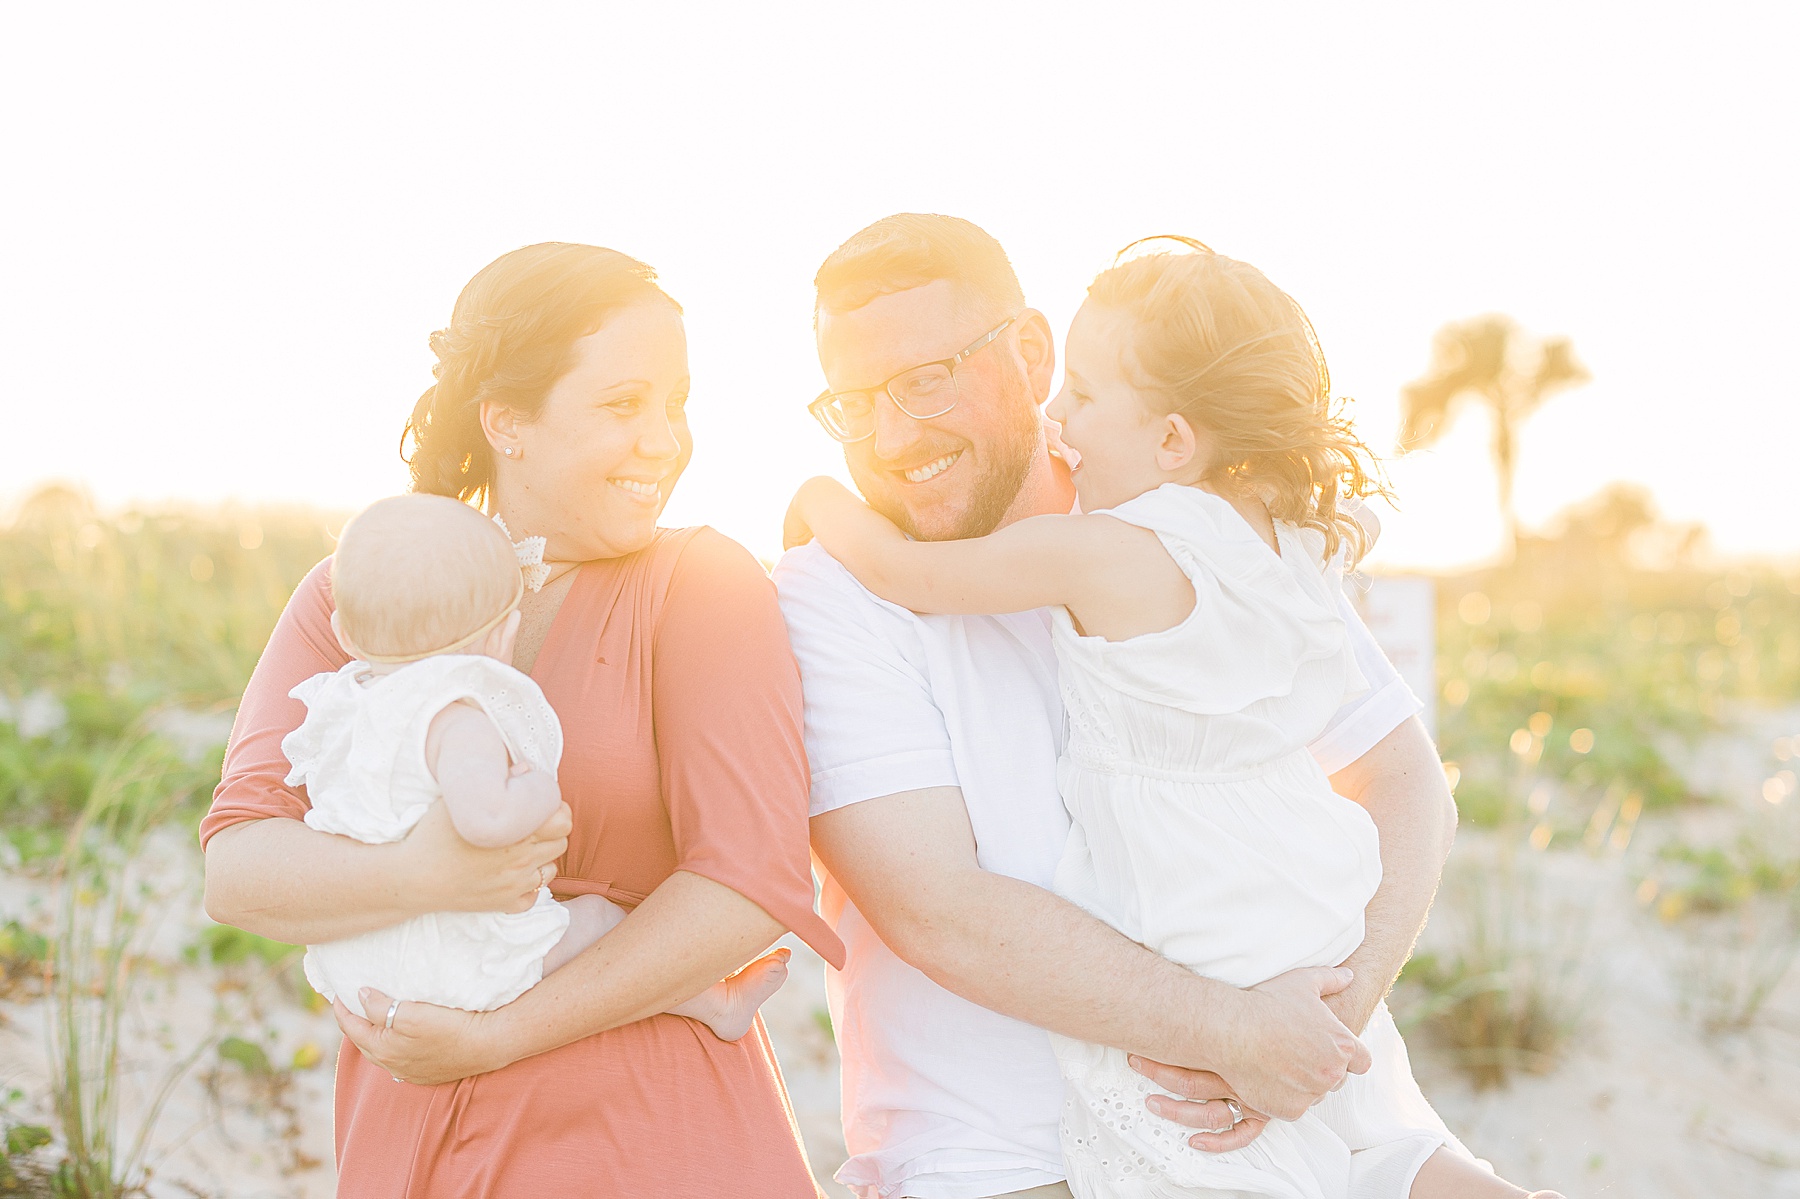 family laughing together at the beach light and airy background